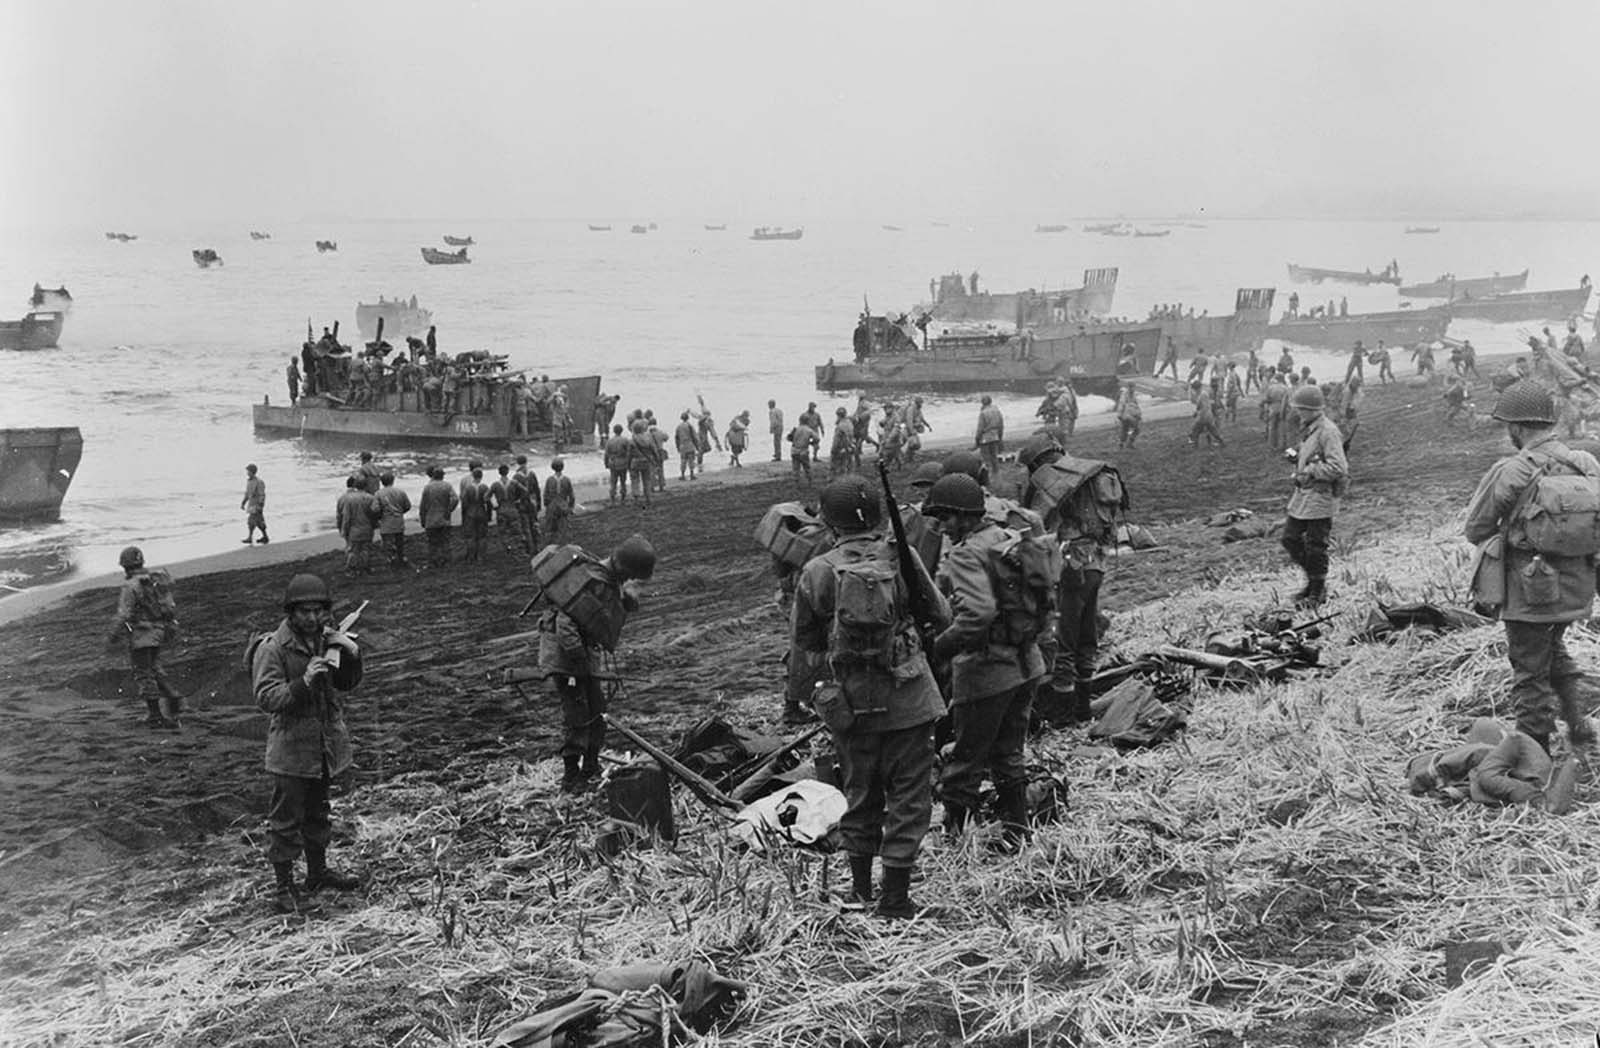 Landing boats pouring soldiers and their equipment onto the beach at Massacre Bay, Attu Island, Alaska. This is the southern landing force on May 11, 1943. The American and Canadian troops took control of Attu within two weeks, after fierce fighting with the Japanese occupying forces. Of the allied troops, 549 were killed and 1,148 wounded -- of the Japanese troops, only 29 men survived. U.S. burial teams counted 2,351 Japanese dead, and presumed hundreds more were unaccounted for.